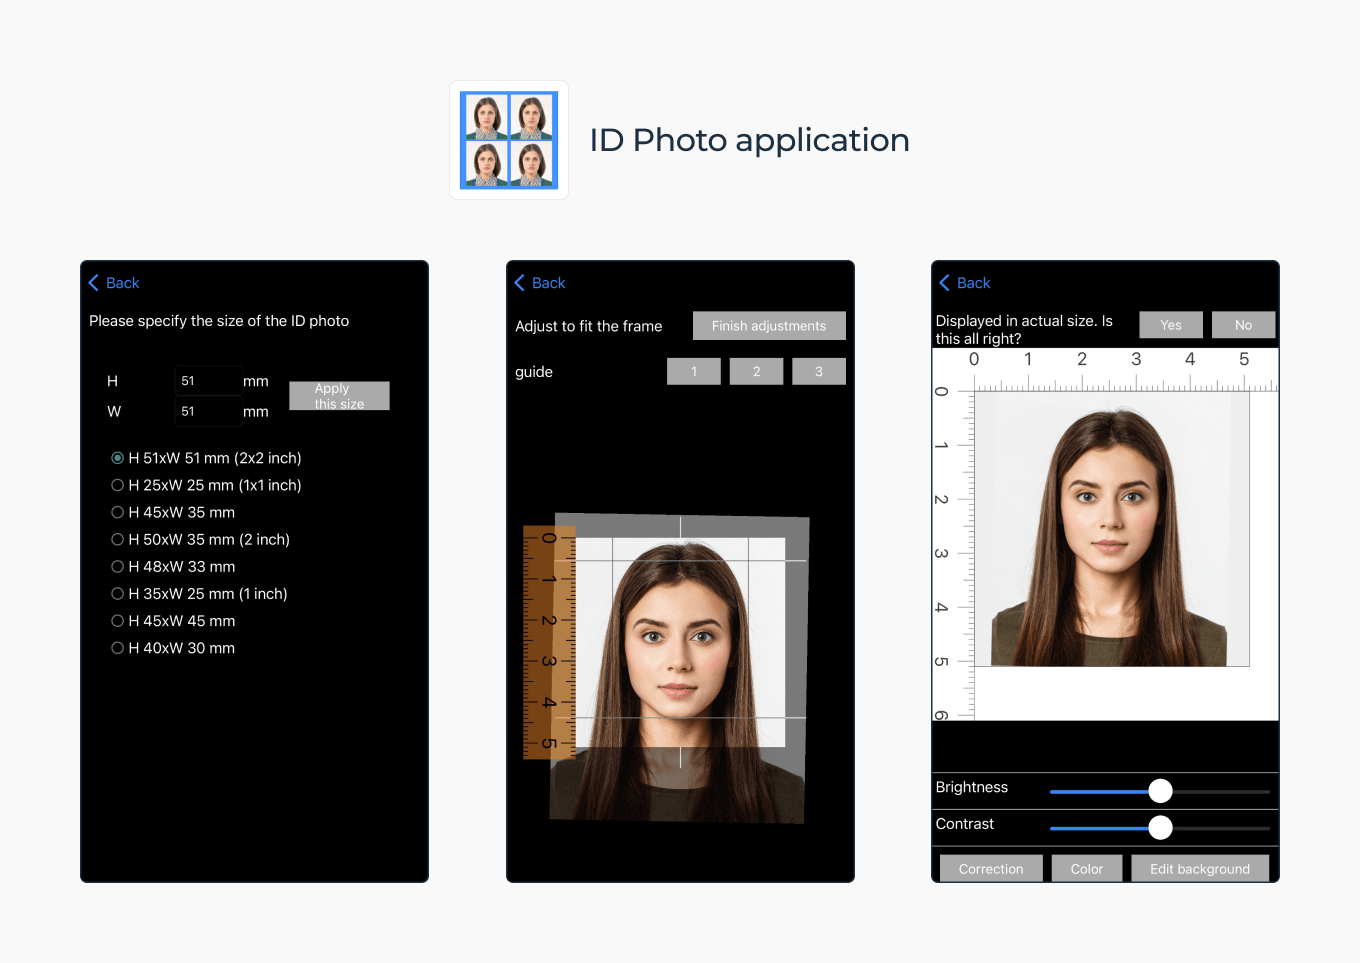 Features available in a free passport photo application.